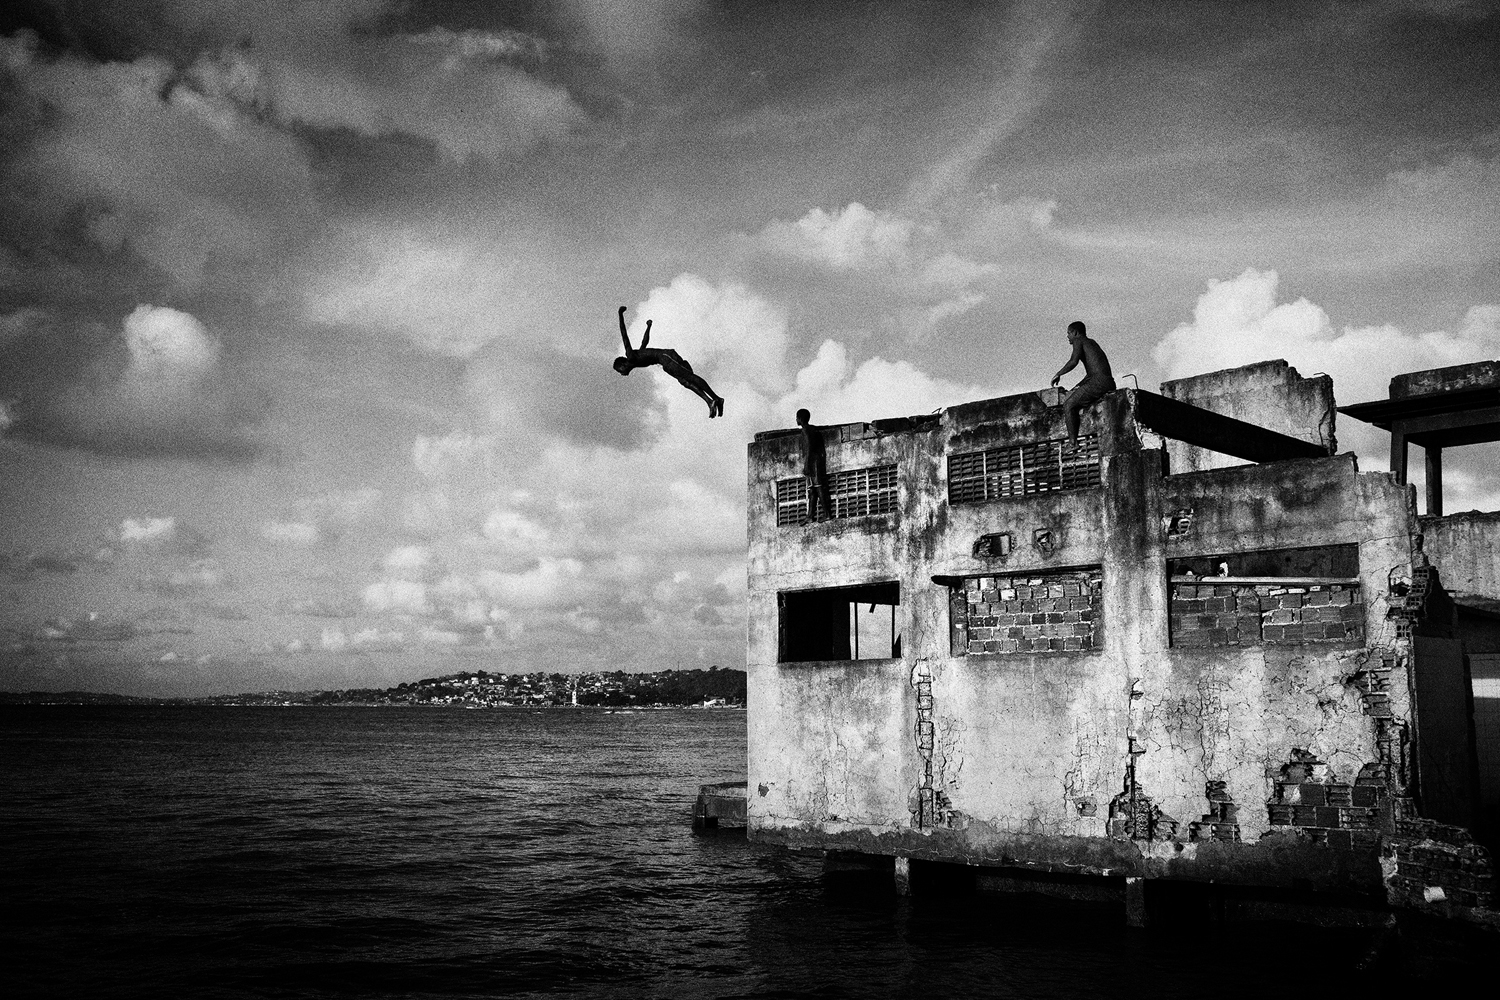 SALVADOR DE BAHIA, BRAZIL – MARCH 20, 2011: A boy jumping from a building of the abandonated chocolate factory, on March 20, 2011 in Salvador de Bahia, Brazil. Despite the lack of socio-economic support from the government, they have managed to make a safe place for themselves to live, and form a community of their own, which is safer that the alternatives available to them. However they are currently being evicted by the government due to being there illegally. (Photo by Sebastian Liste/Reportage by Getty Images)